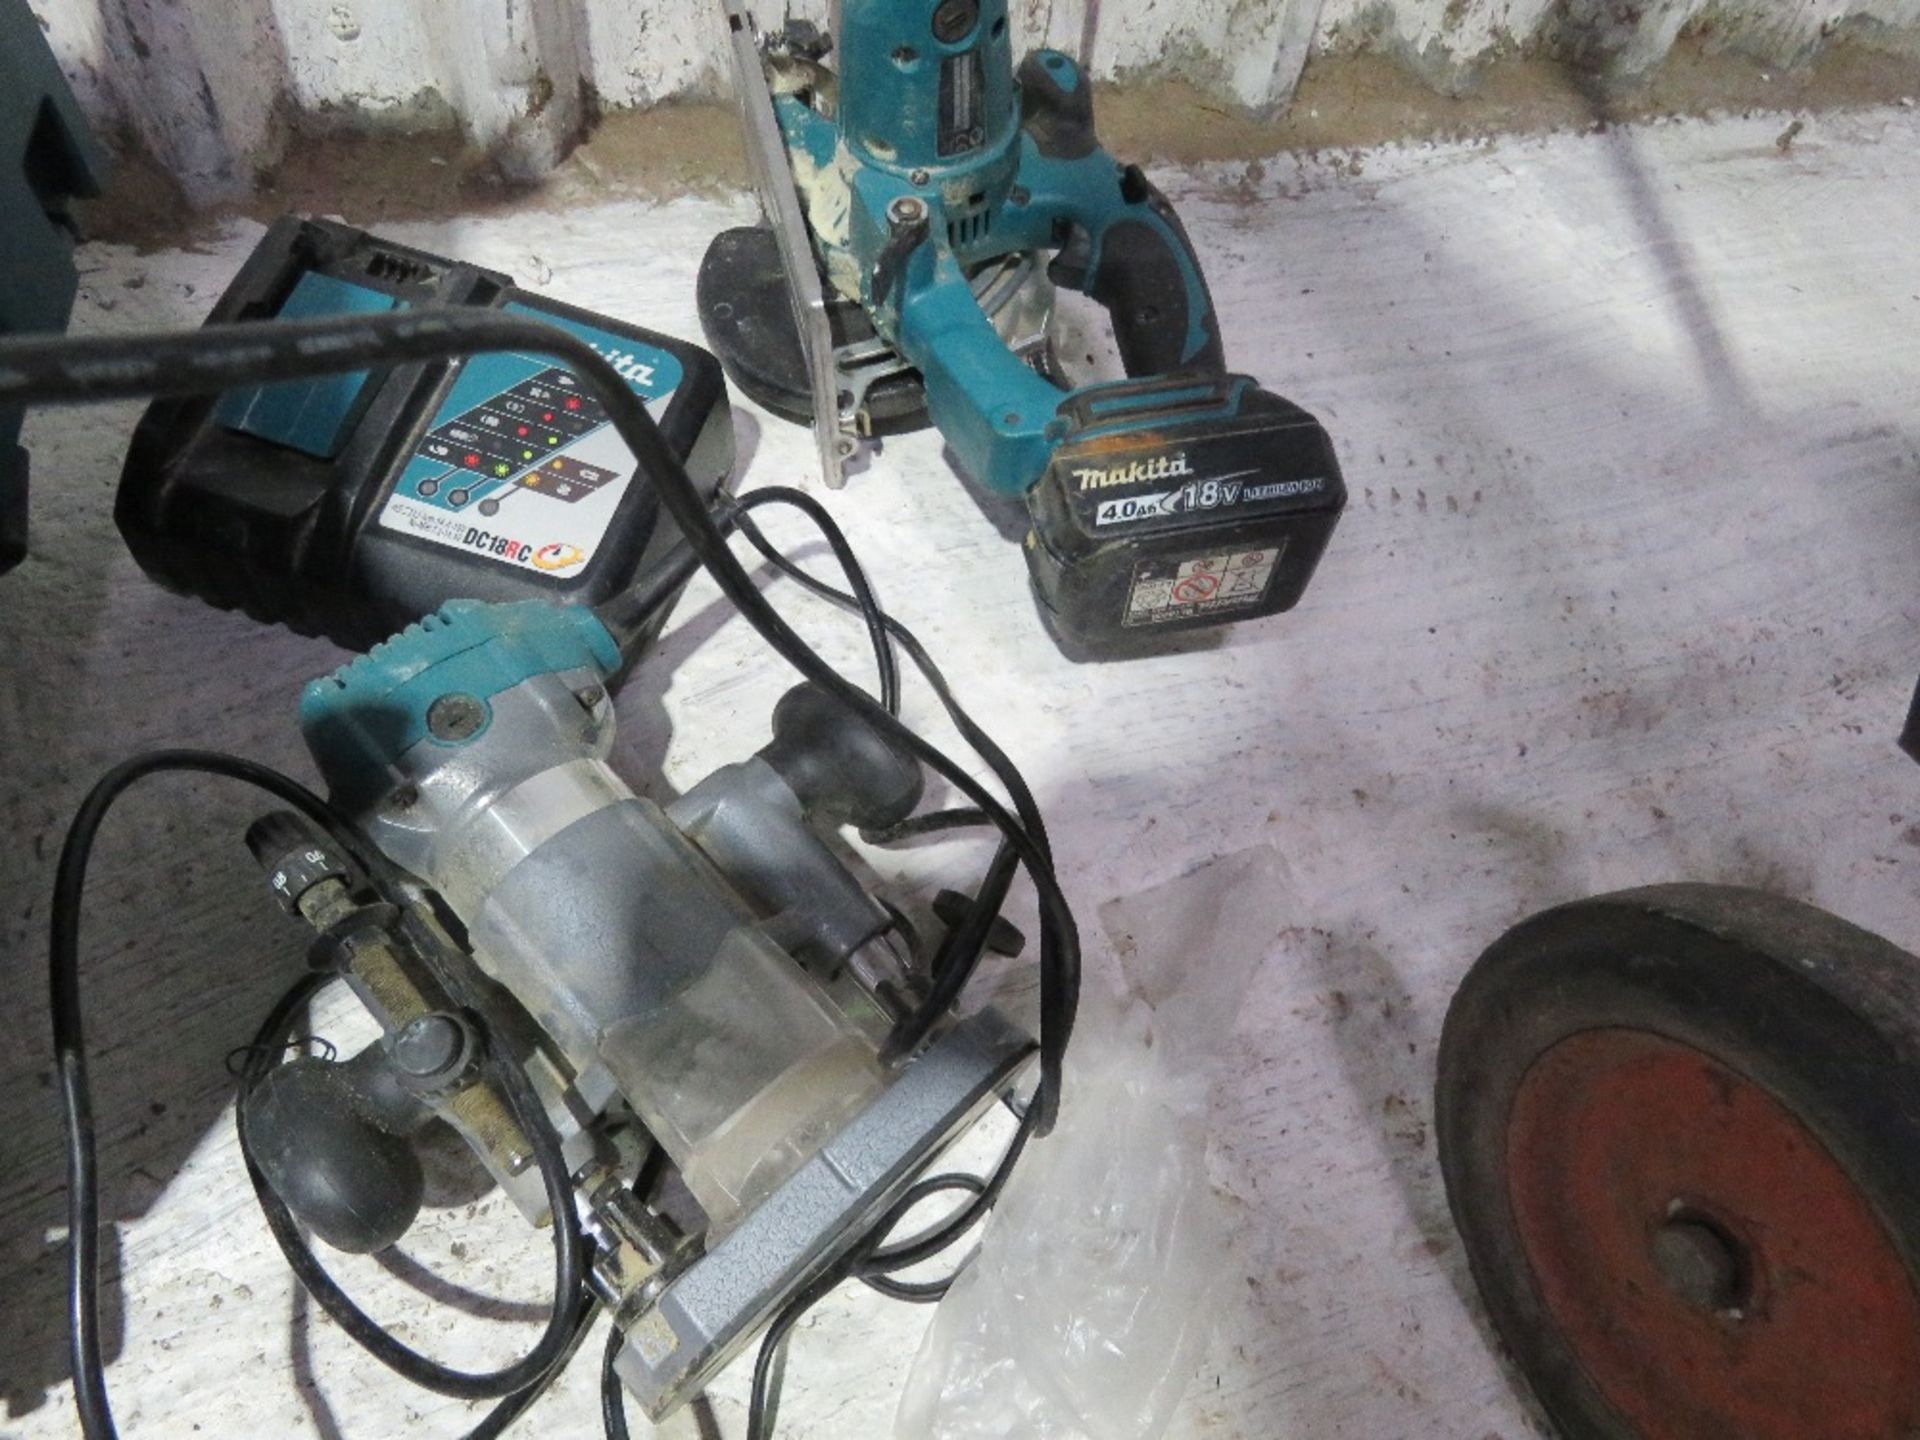 MAKITA TOOLS X 3: BATTERY CIRCULAR SAW, ELECTRIC ROUTER & CORE DRILL. - Image 4 of 9